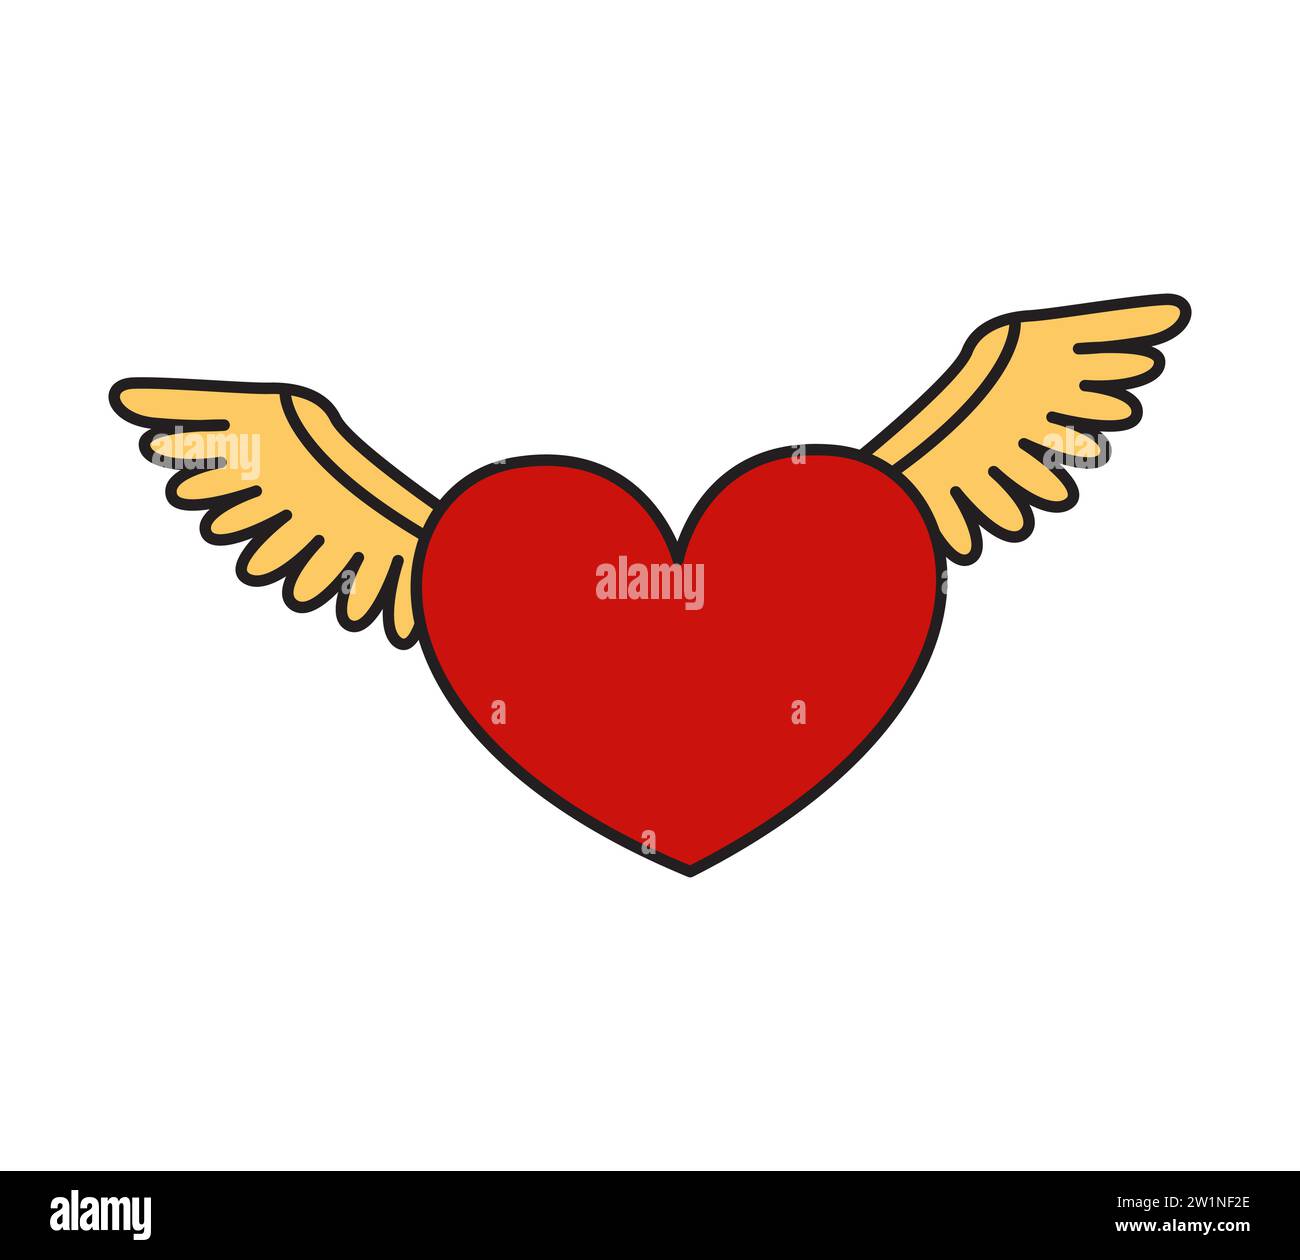 Heart With Wings Retro Style Tattoo Stock Vector